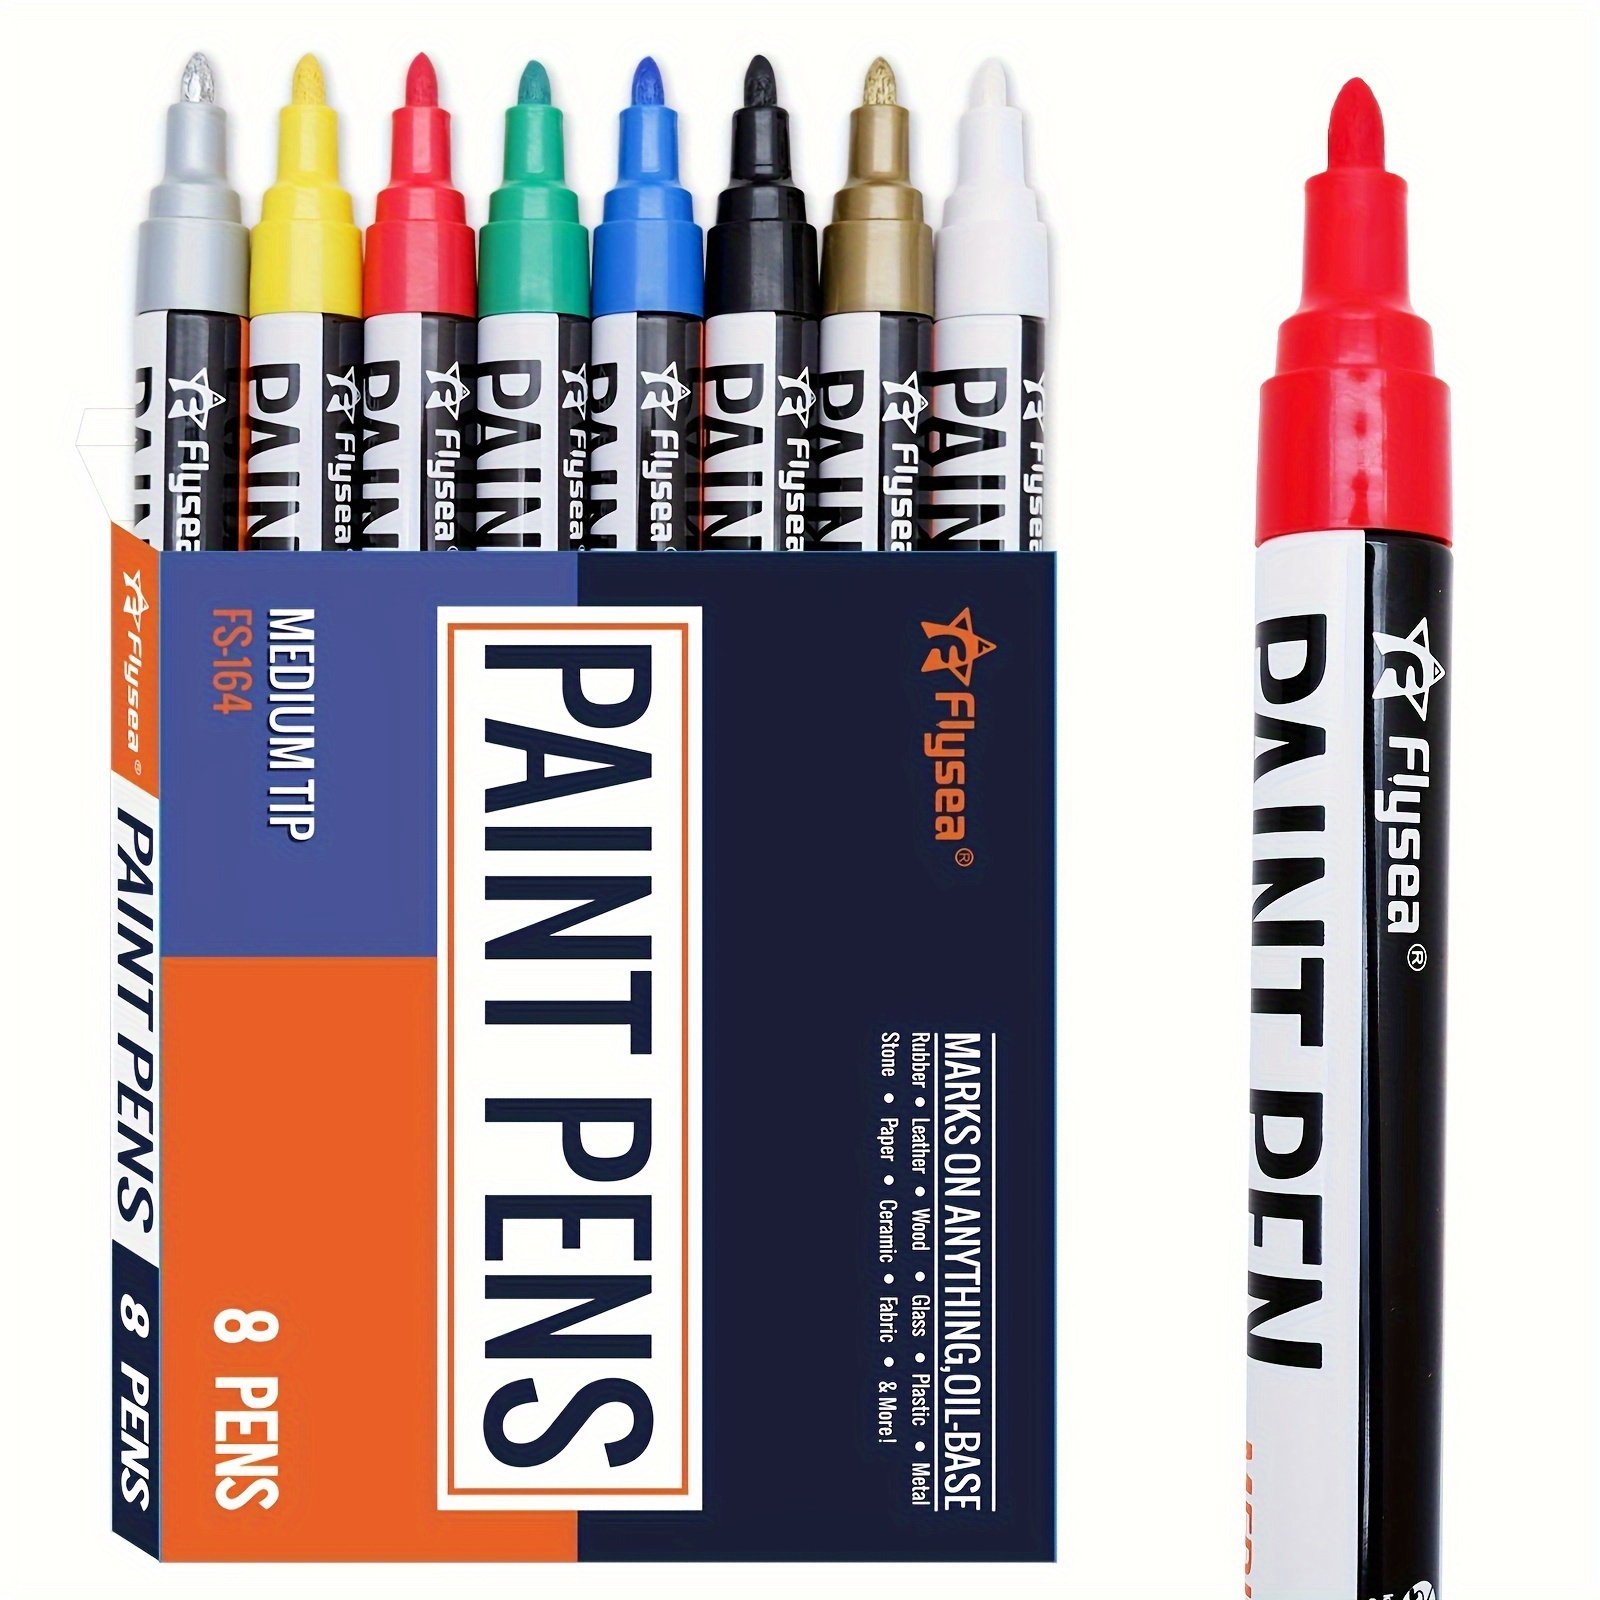 

Vibrant Quick-dry & Permanent Oil-based Paint Marker Set - Perfect For Diy Crafts On Rocks, Fabric, Glass & More Oil Paints And Accesorie Paintable Crafts